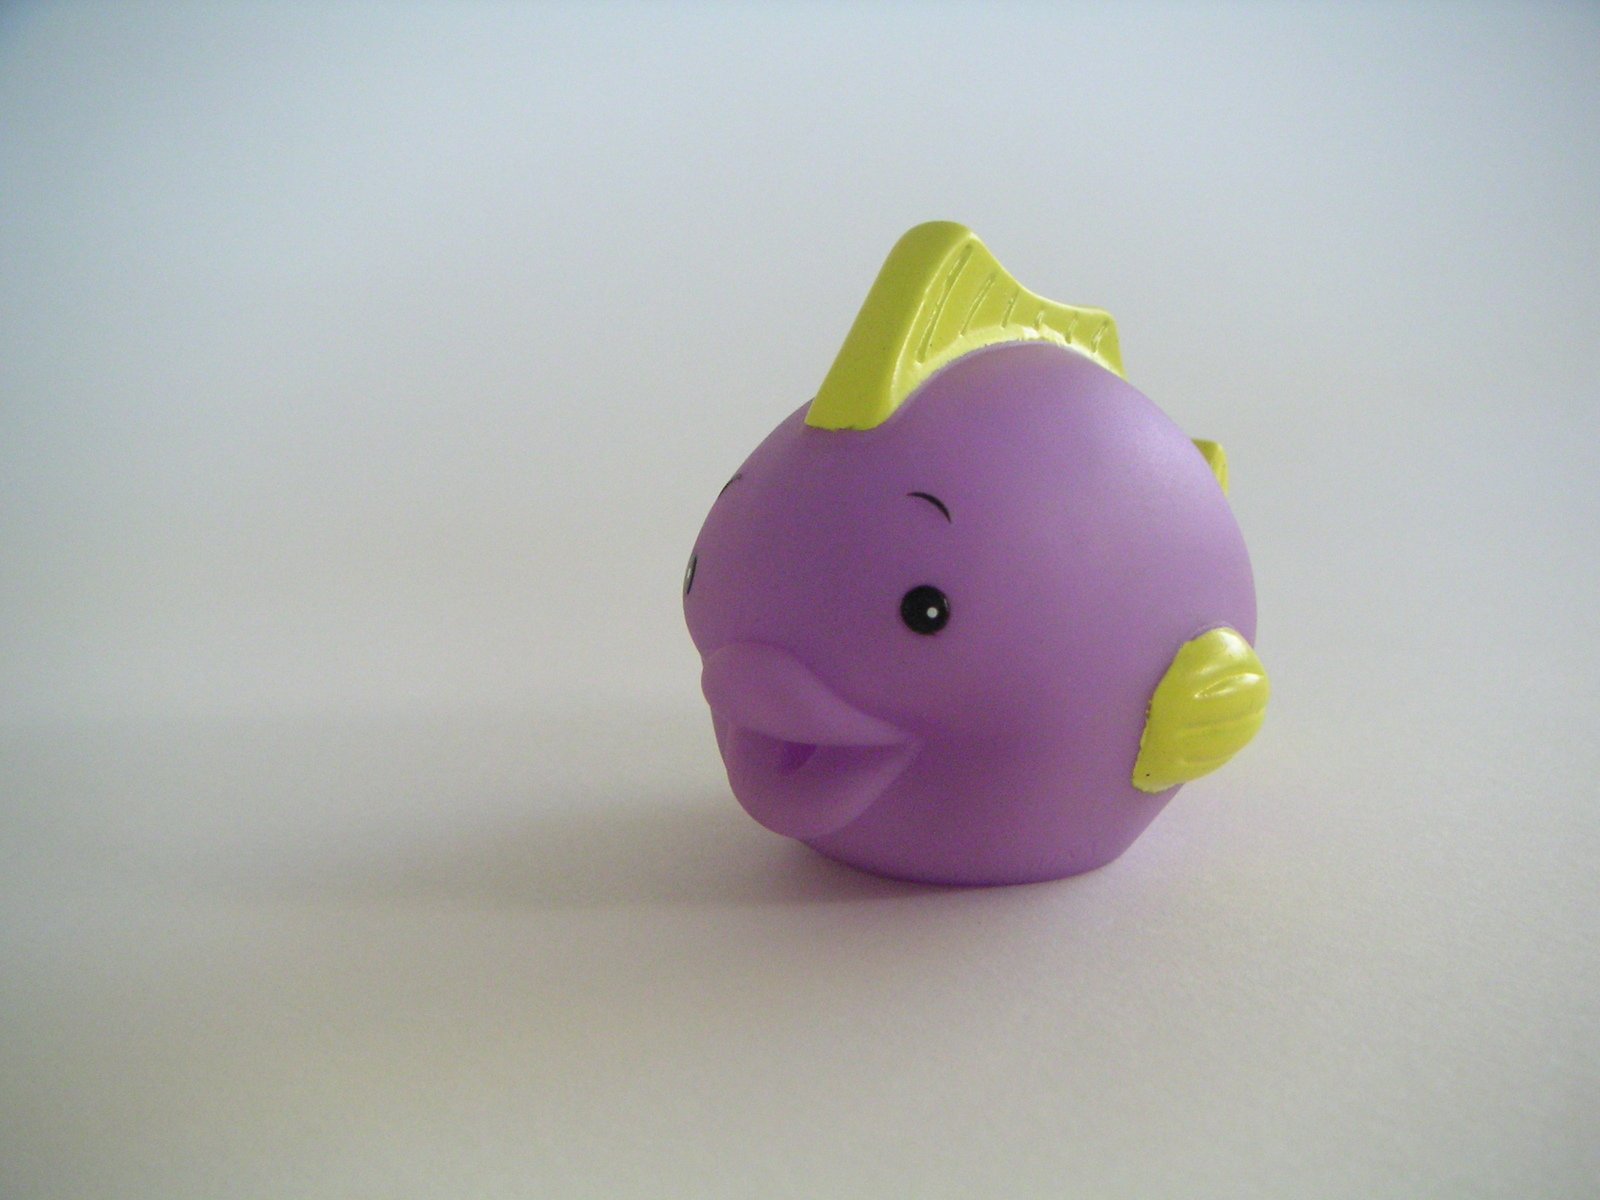 there is a toy purple and yellow fish